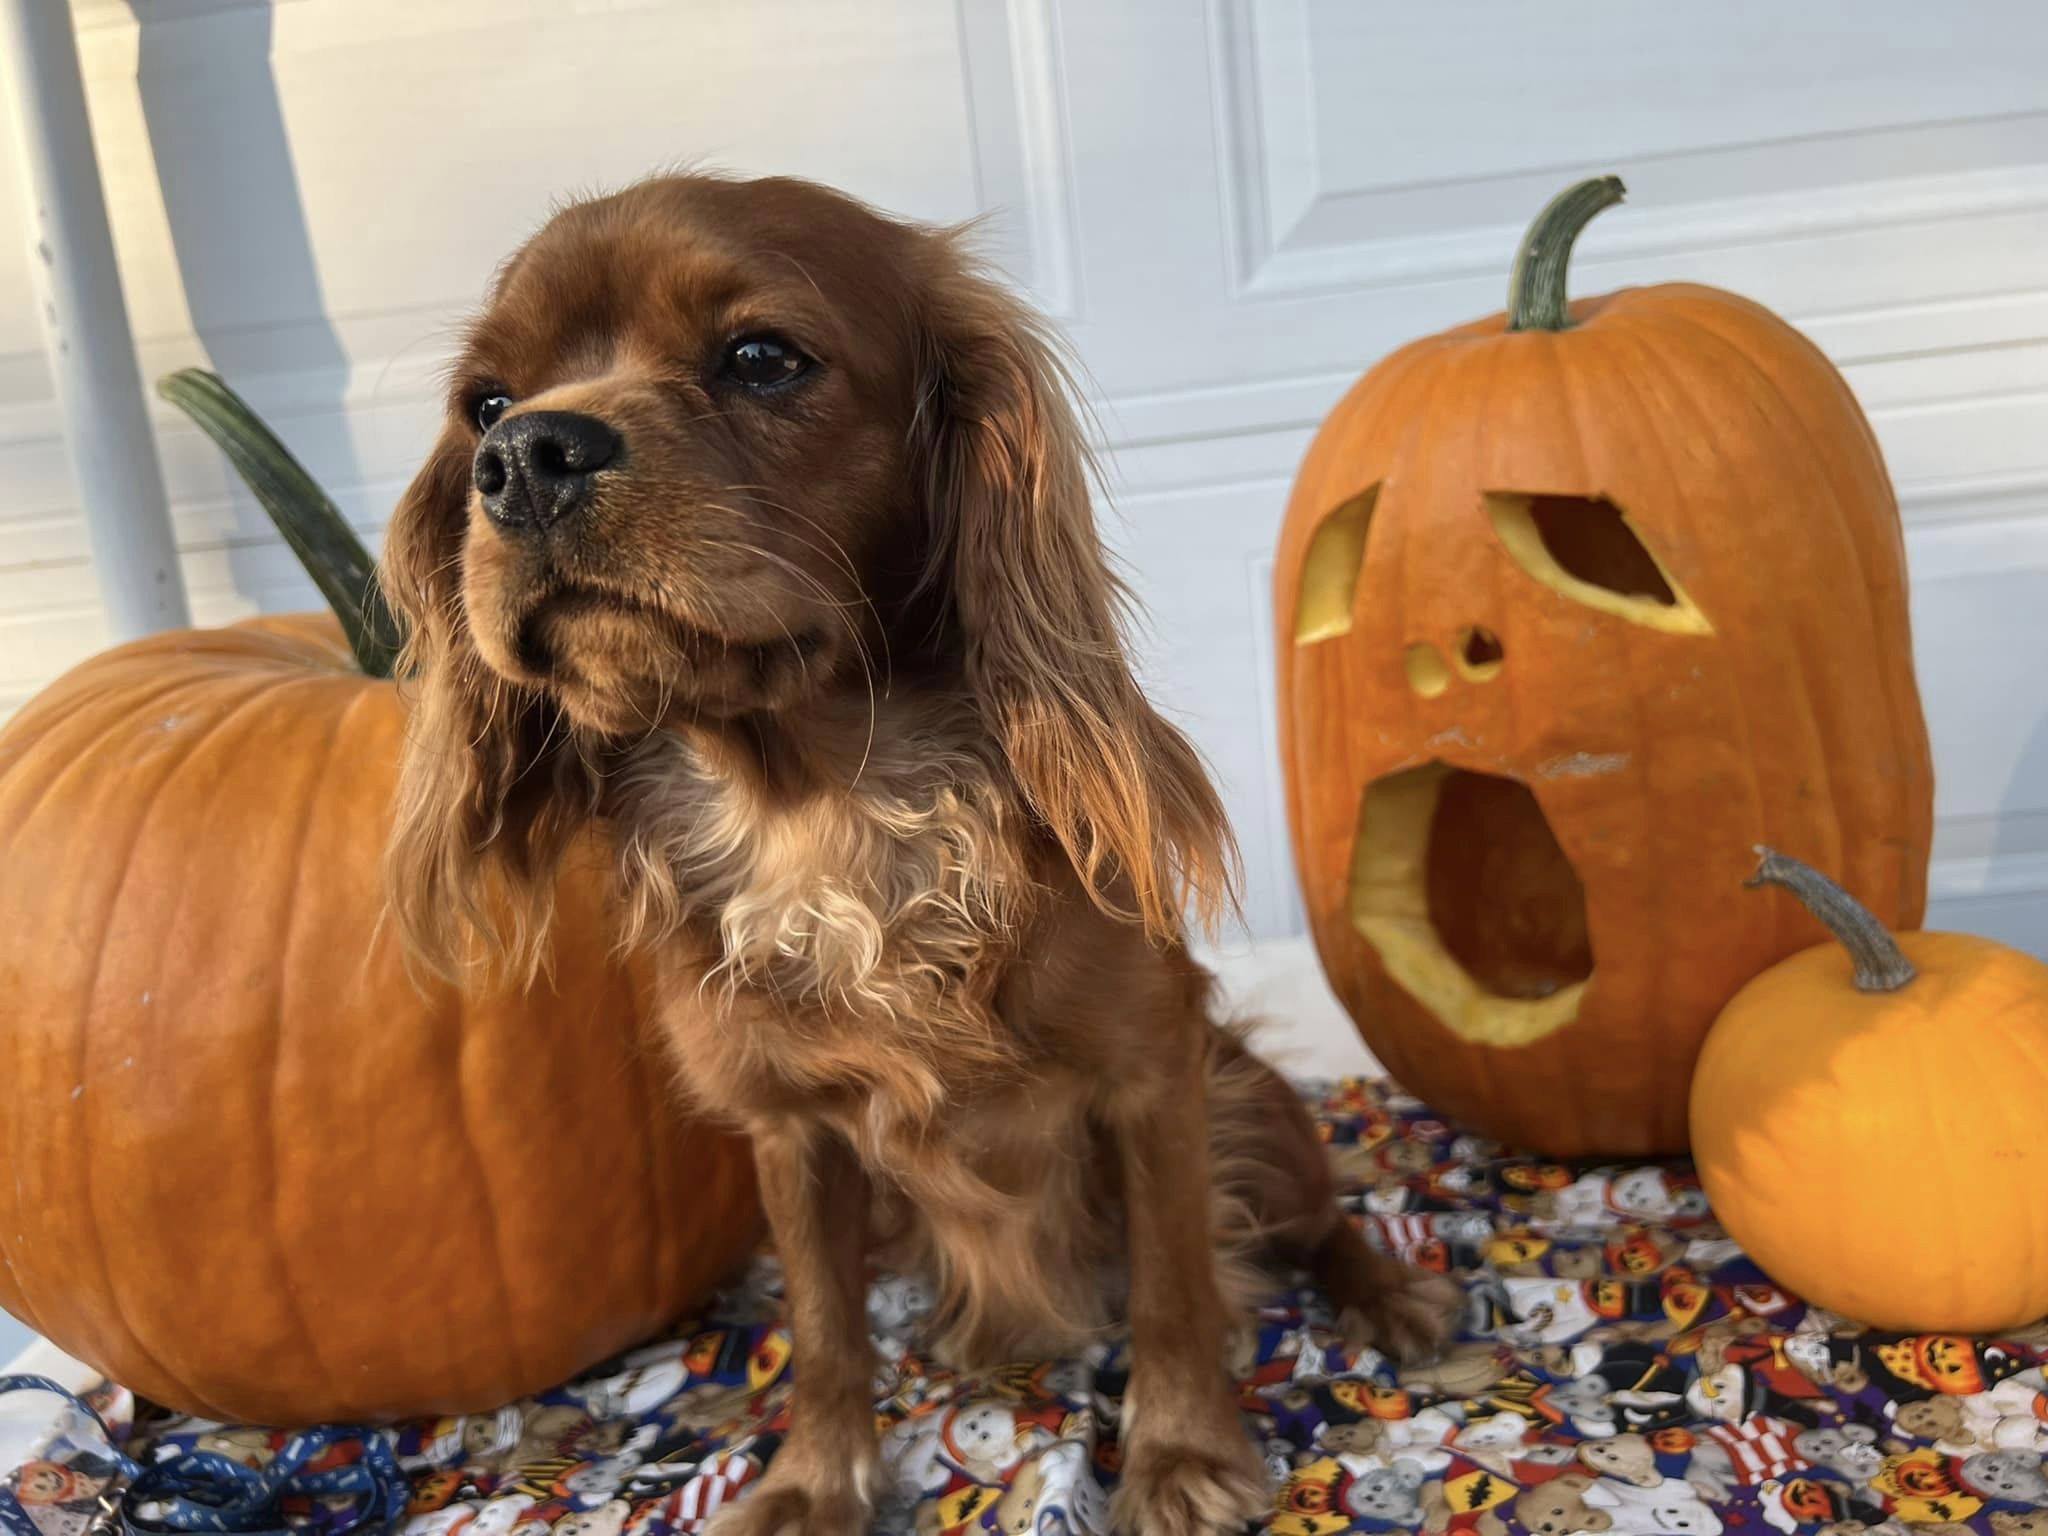 Penny with Pumpkins